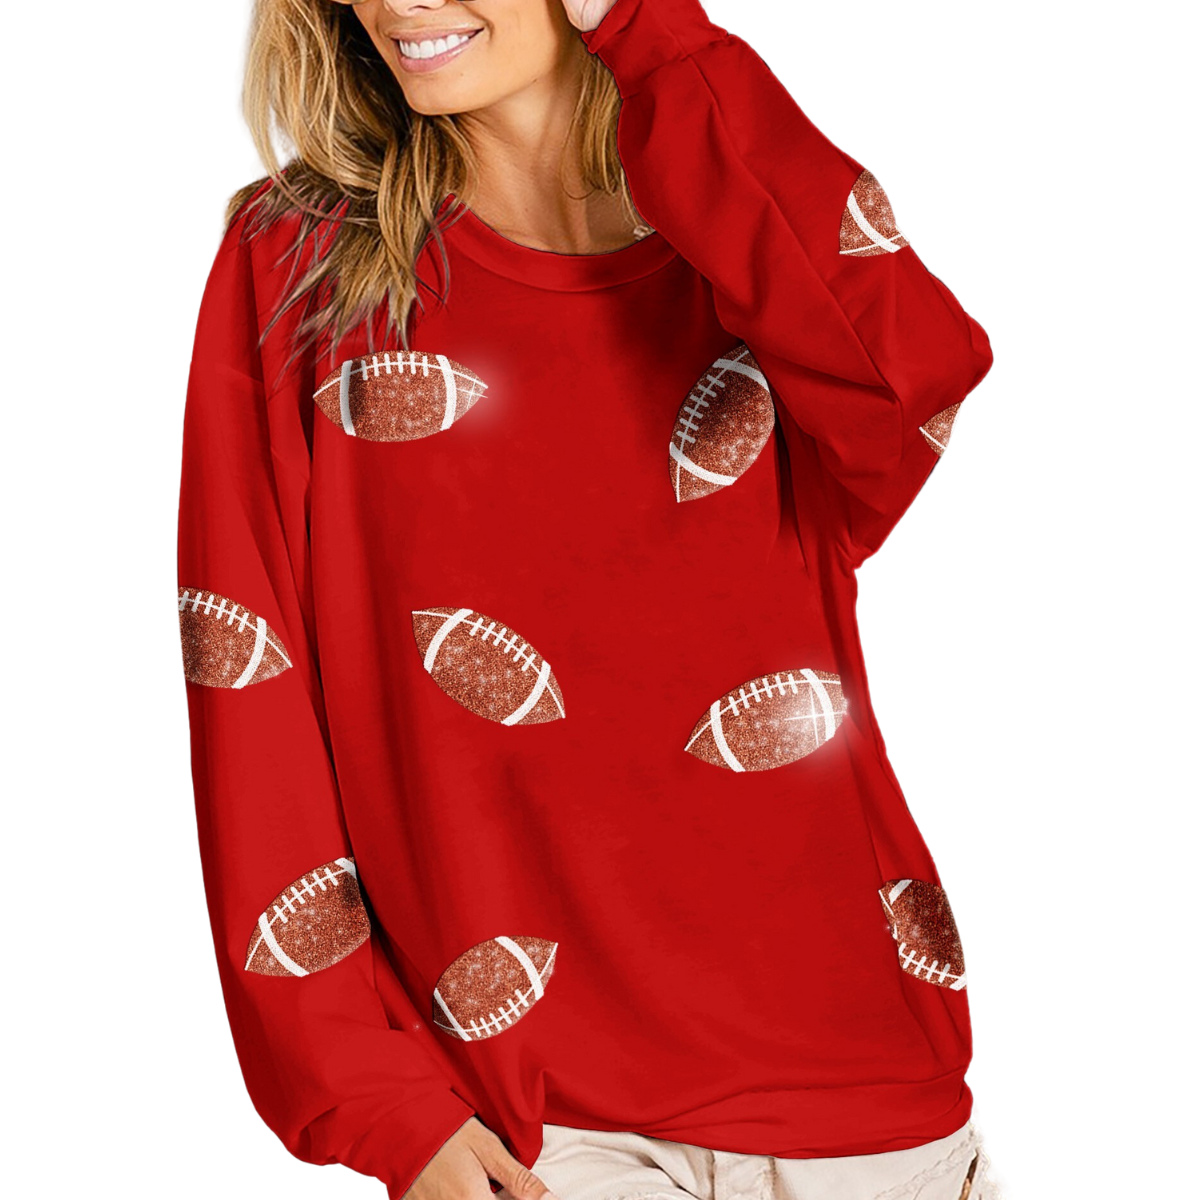 A woman smiles while wearing a FASHION GO Sequin Football Sweatshirt in Red adorned with sequined football graphics.